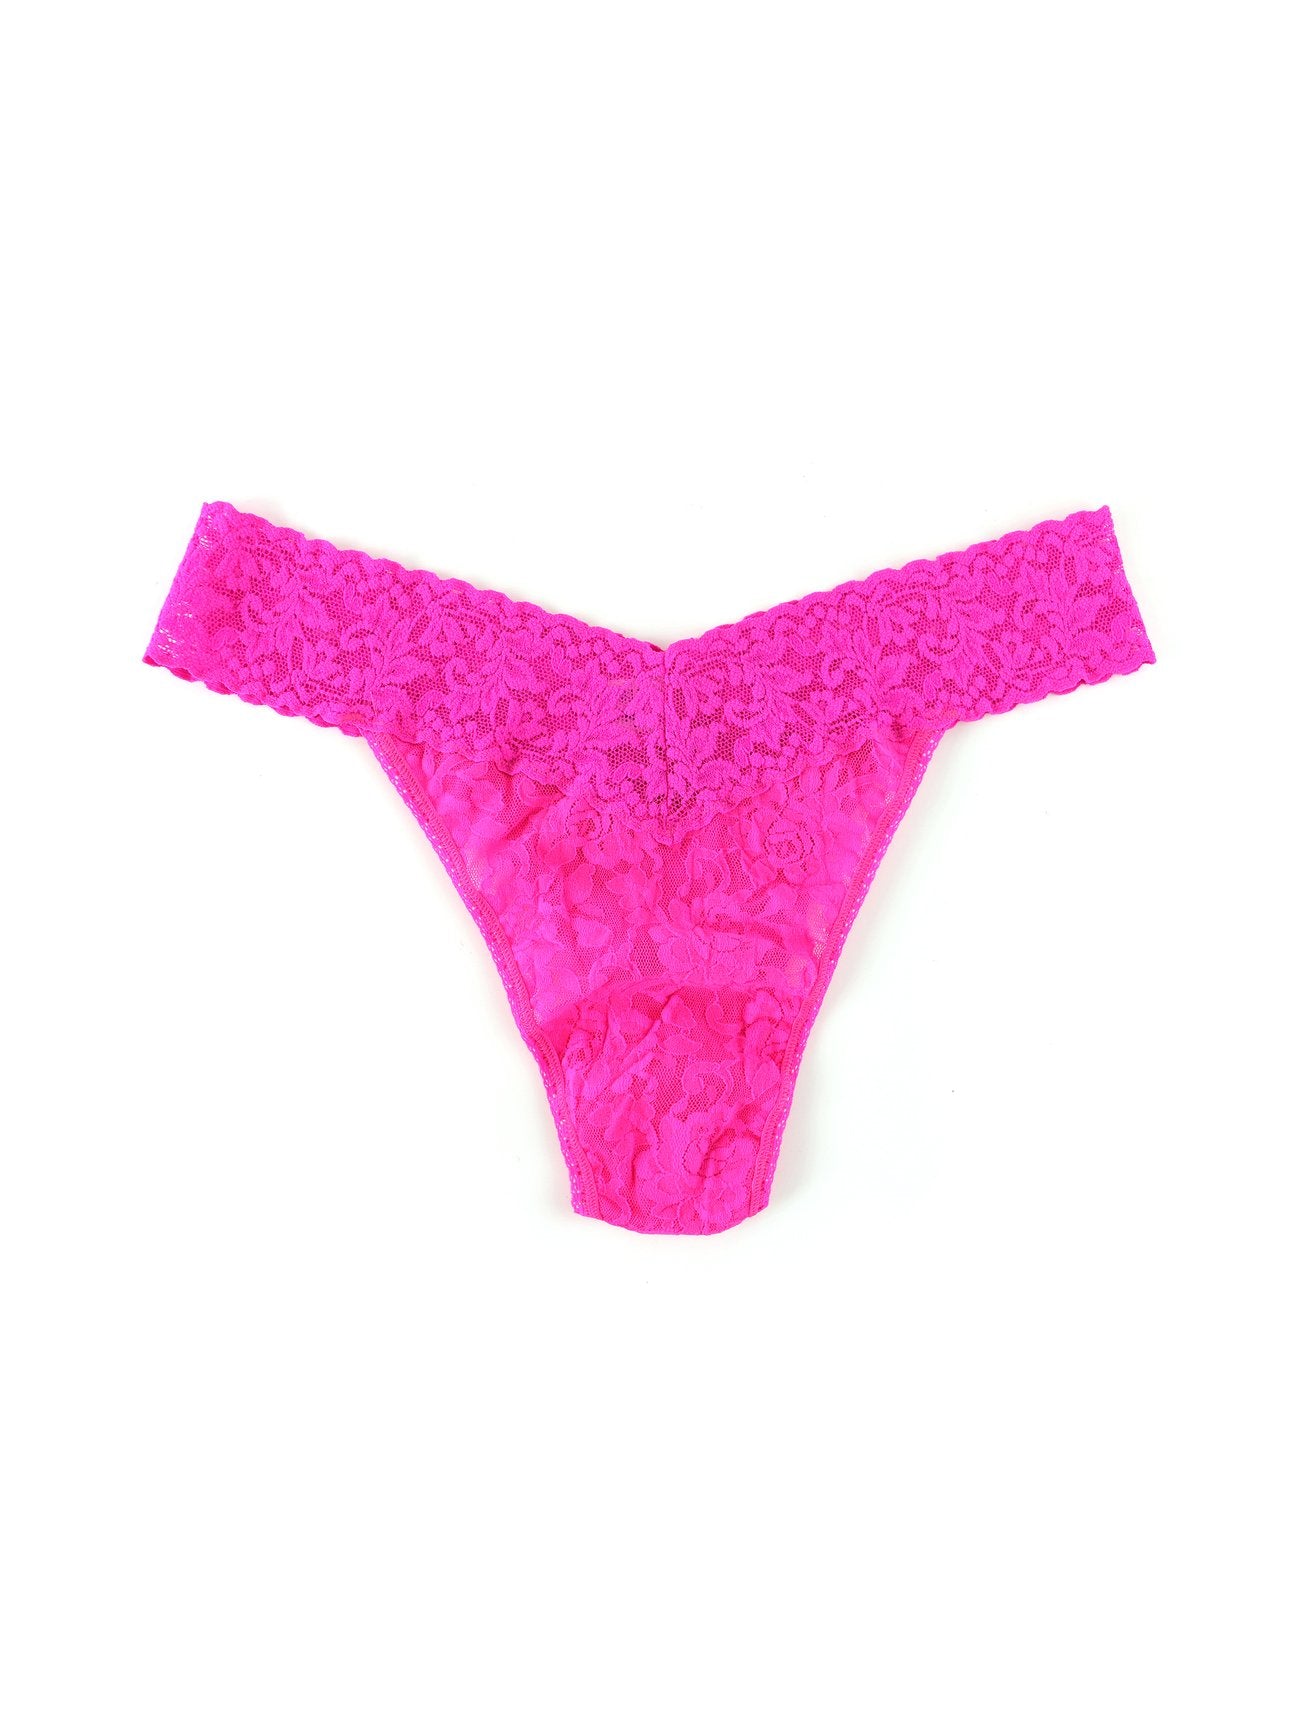 Buy passionate-pink Hanky Panky Signature Lace Original Rise Thong-Packaged 4811p